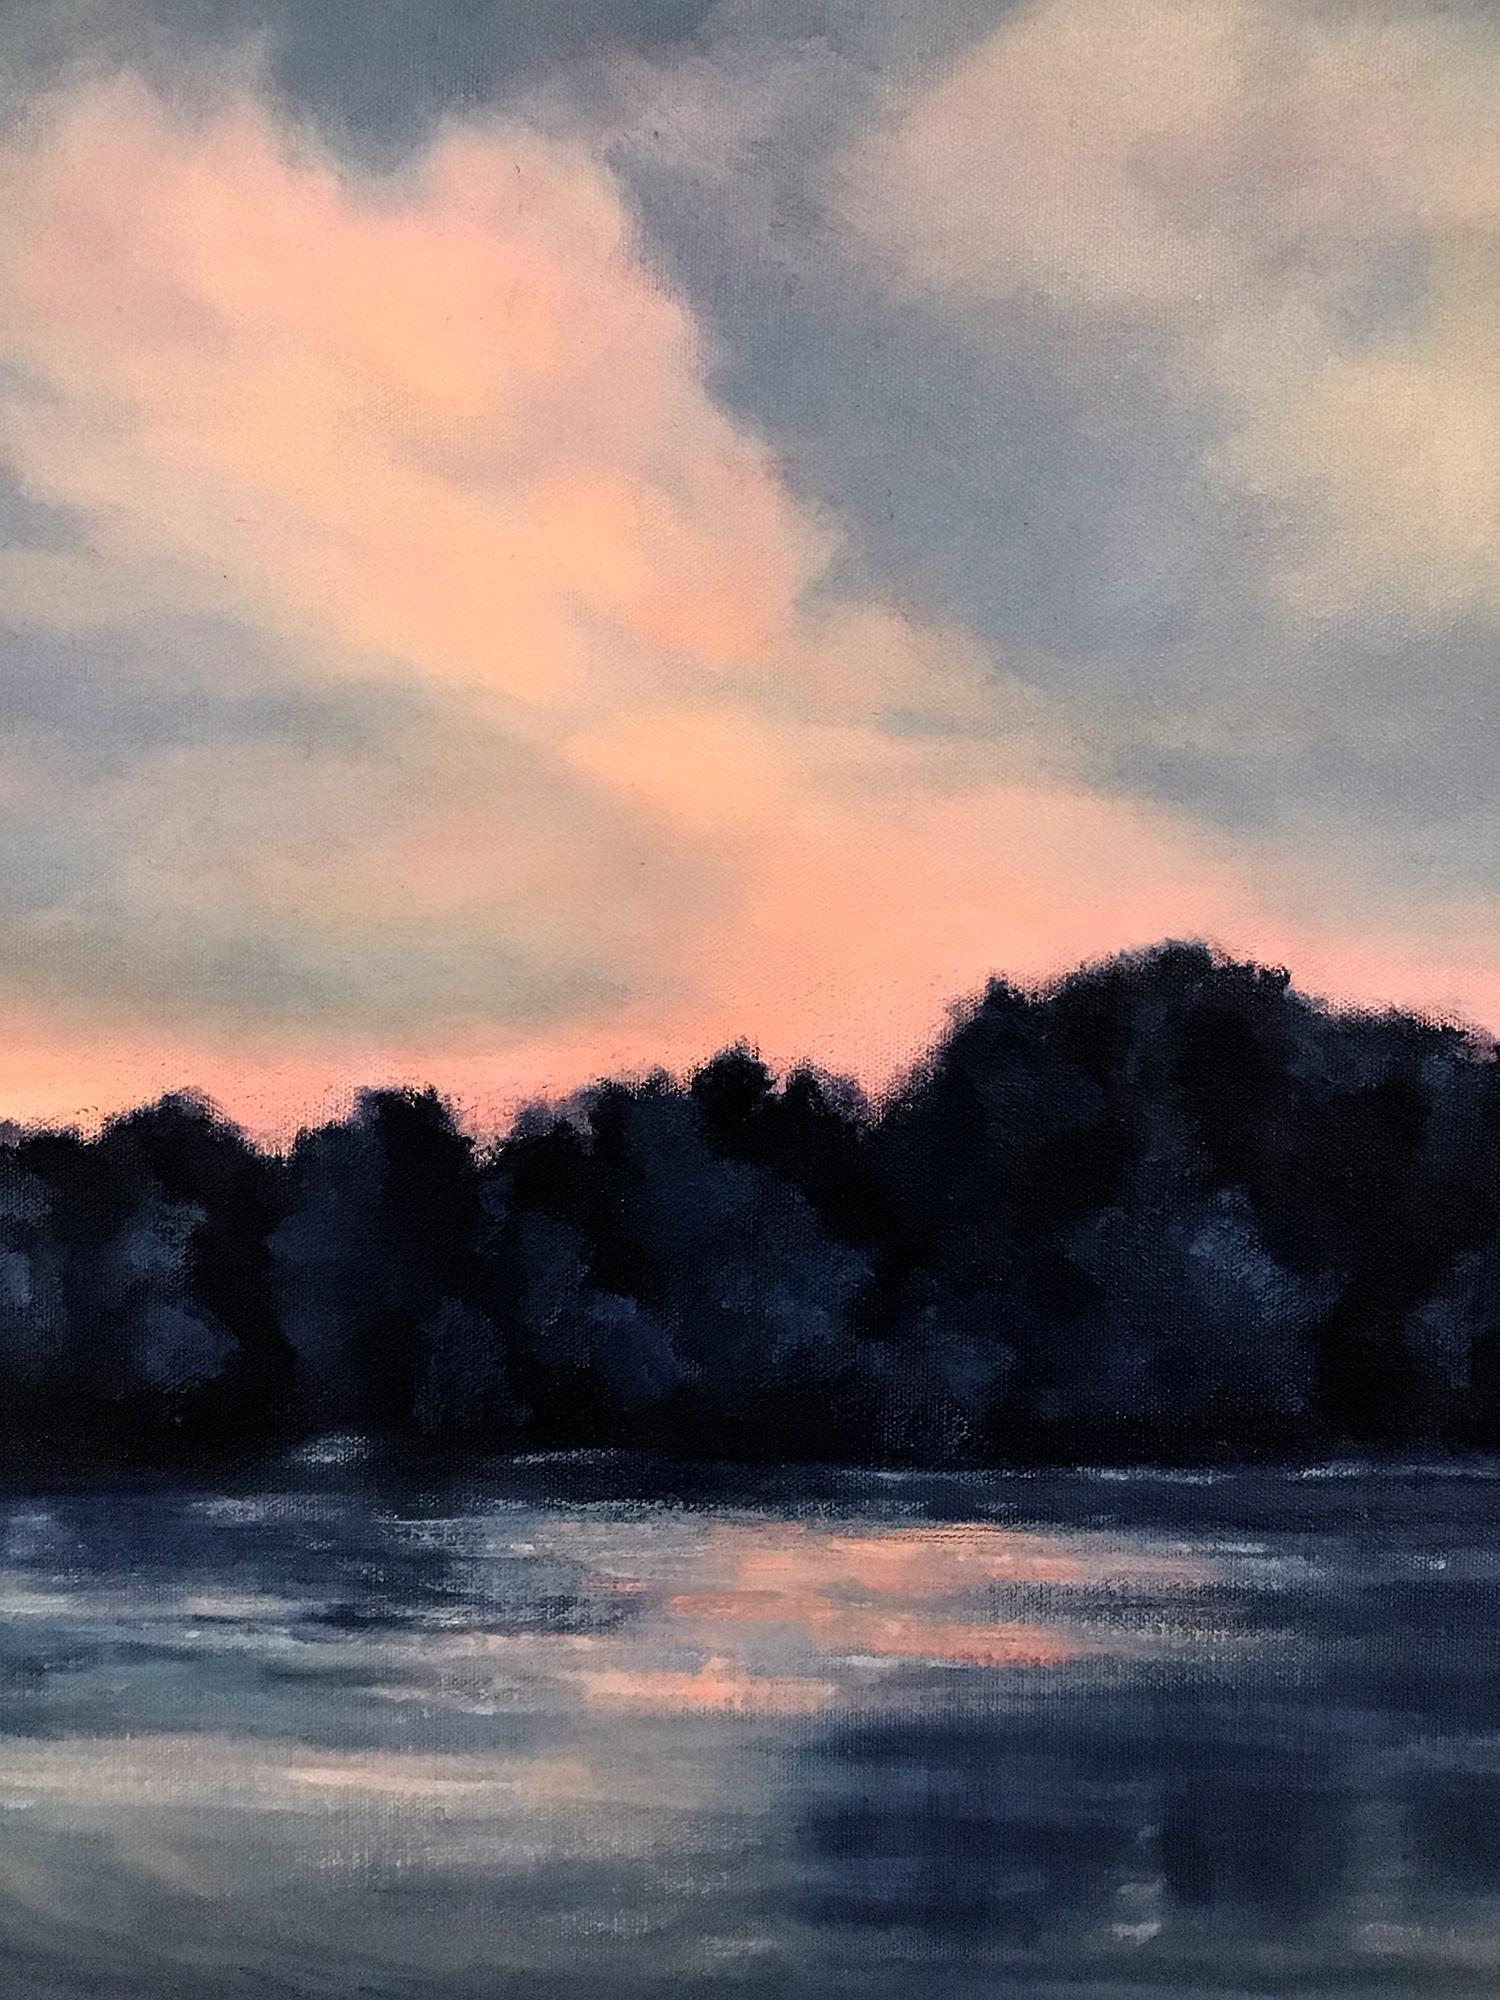 <p>Artist Comments<br>A panoramic view of the sunset falling on a quiet lake. Artist Elizabeth Garat captures the calm moment with soft billowing clouds and shadowed trees reflected on the water. Touches of coral and pink illuminate the sky above an